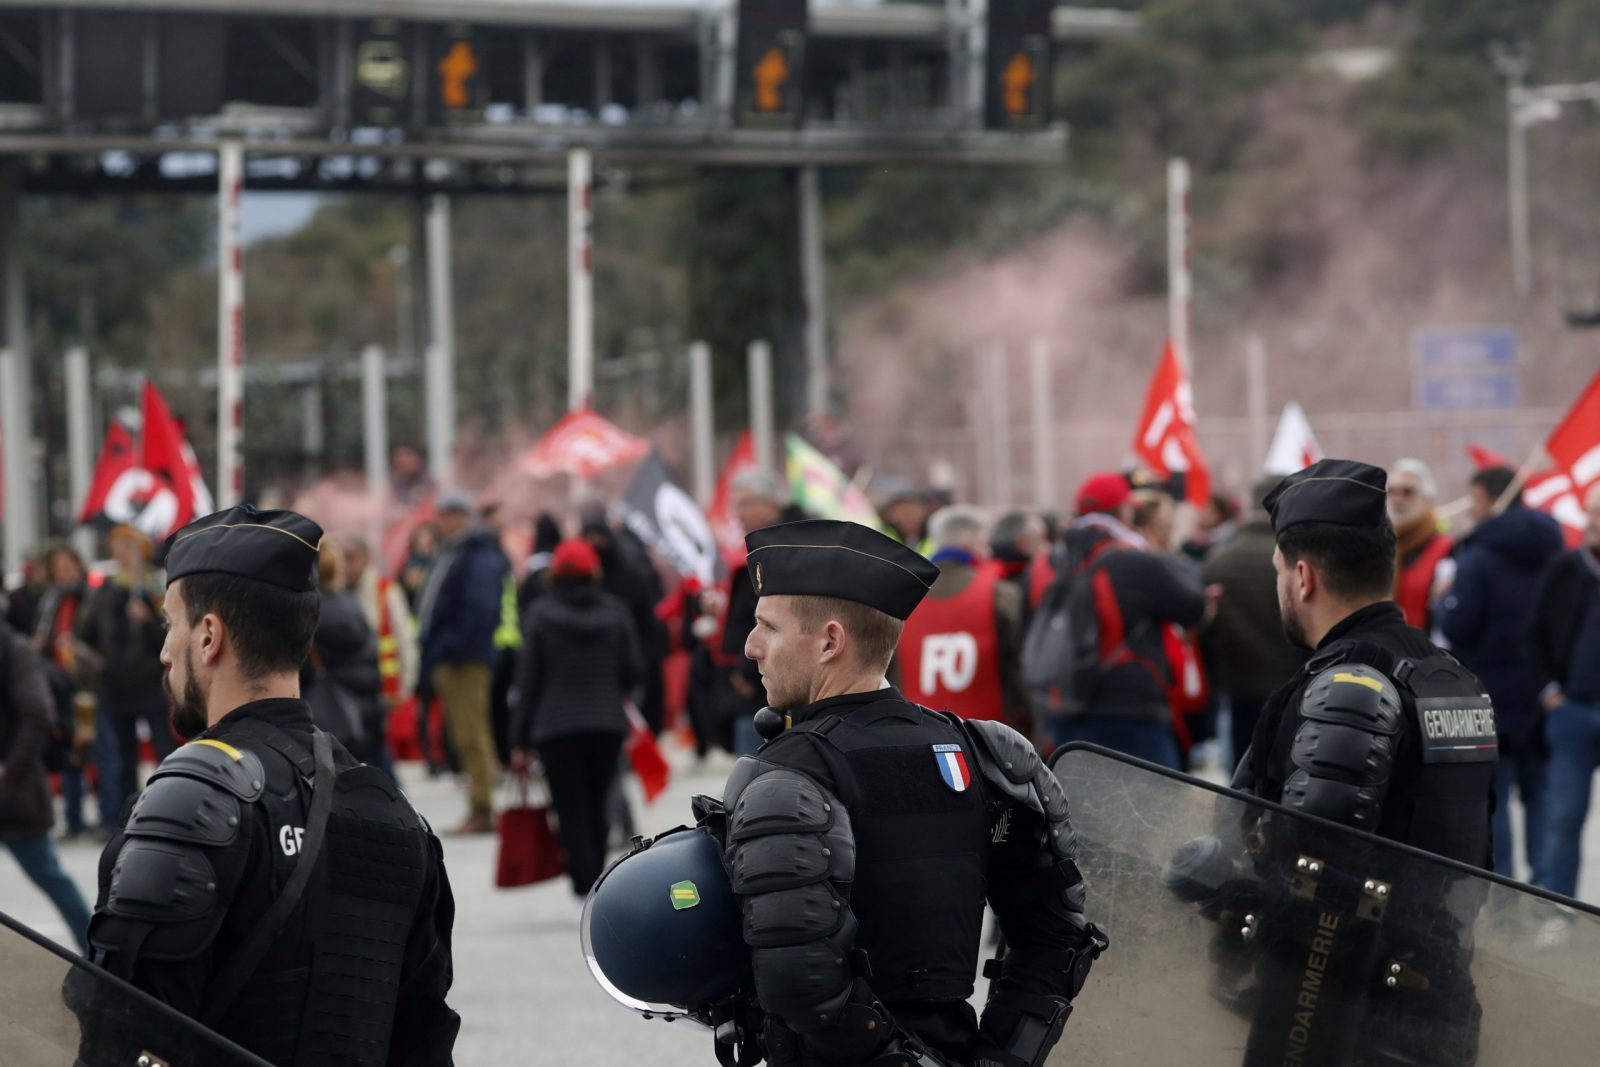 epa10511166 Riot police stand as people block the A9 motorway towards Spain during a new day of protests against the French government's planned reform of the pension system, in Le Boulou, southern France, 09 March 2023. Workers' Force (FO) and General Confederation of Labour (CGT) union members blocked traffic. Protests continue across the country due to the French government's plan to delay the minimum retirement age from 62 to 64 by 2030.  EPA/GUILLAUME HORCAJUELO